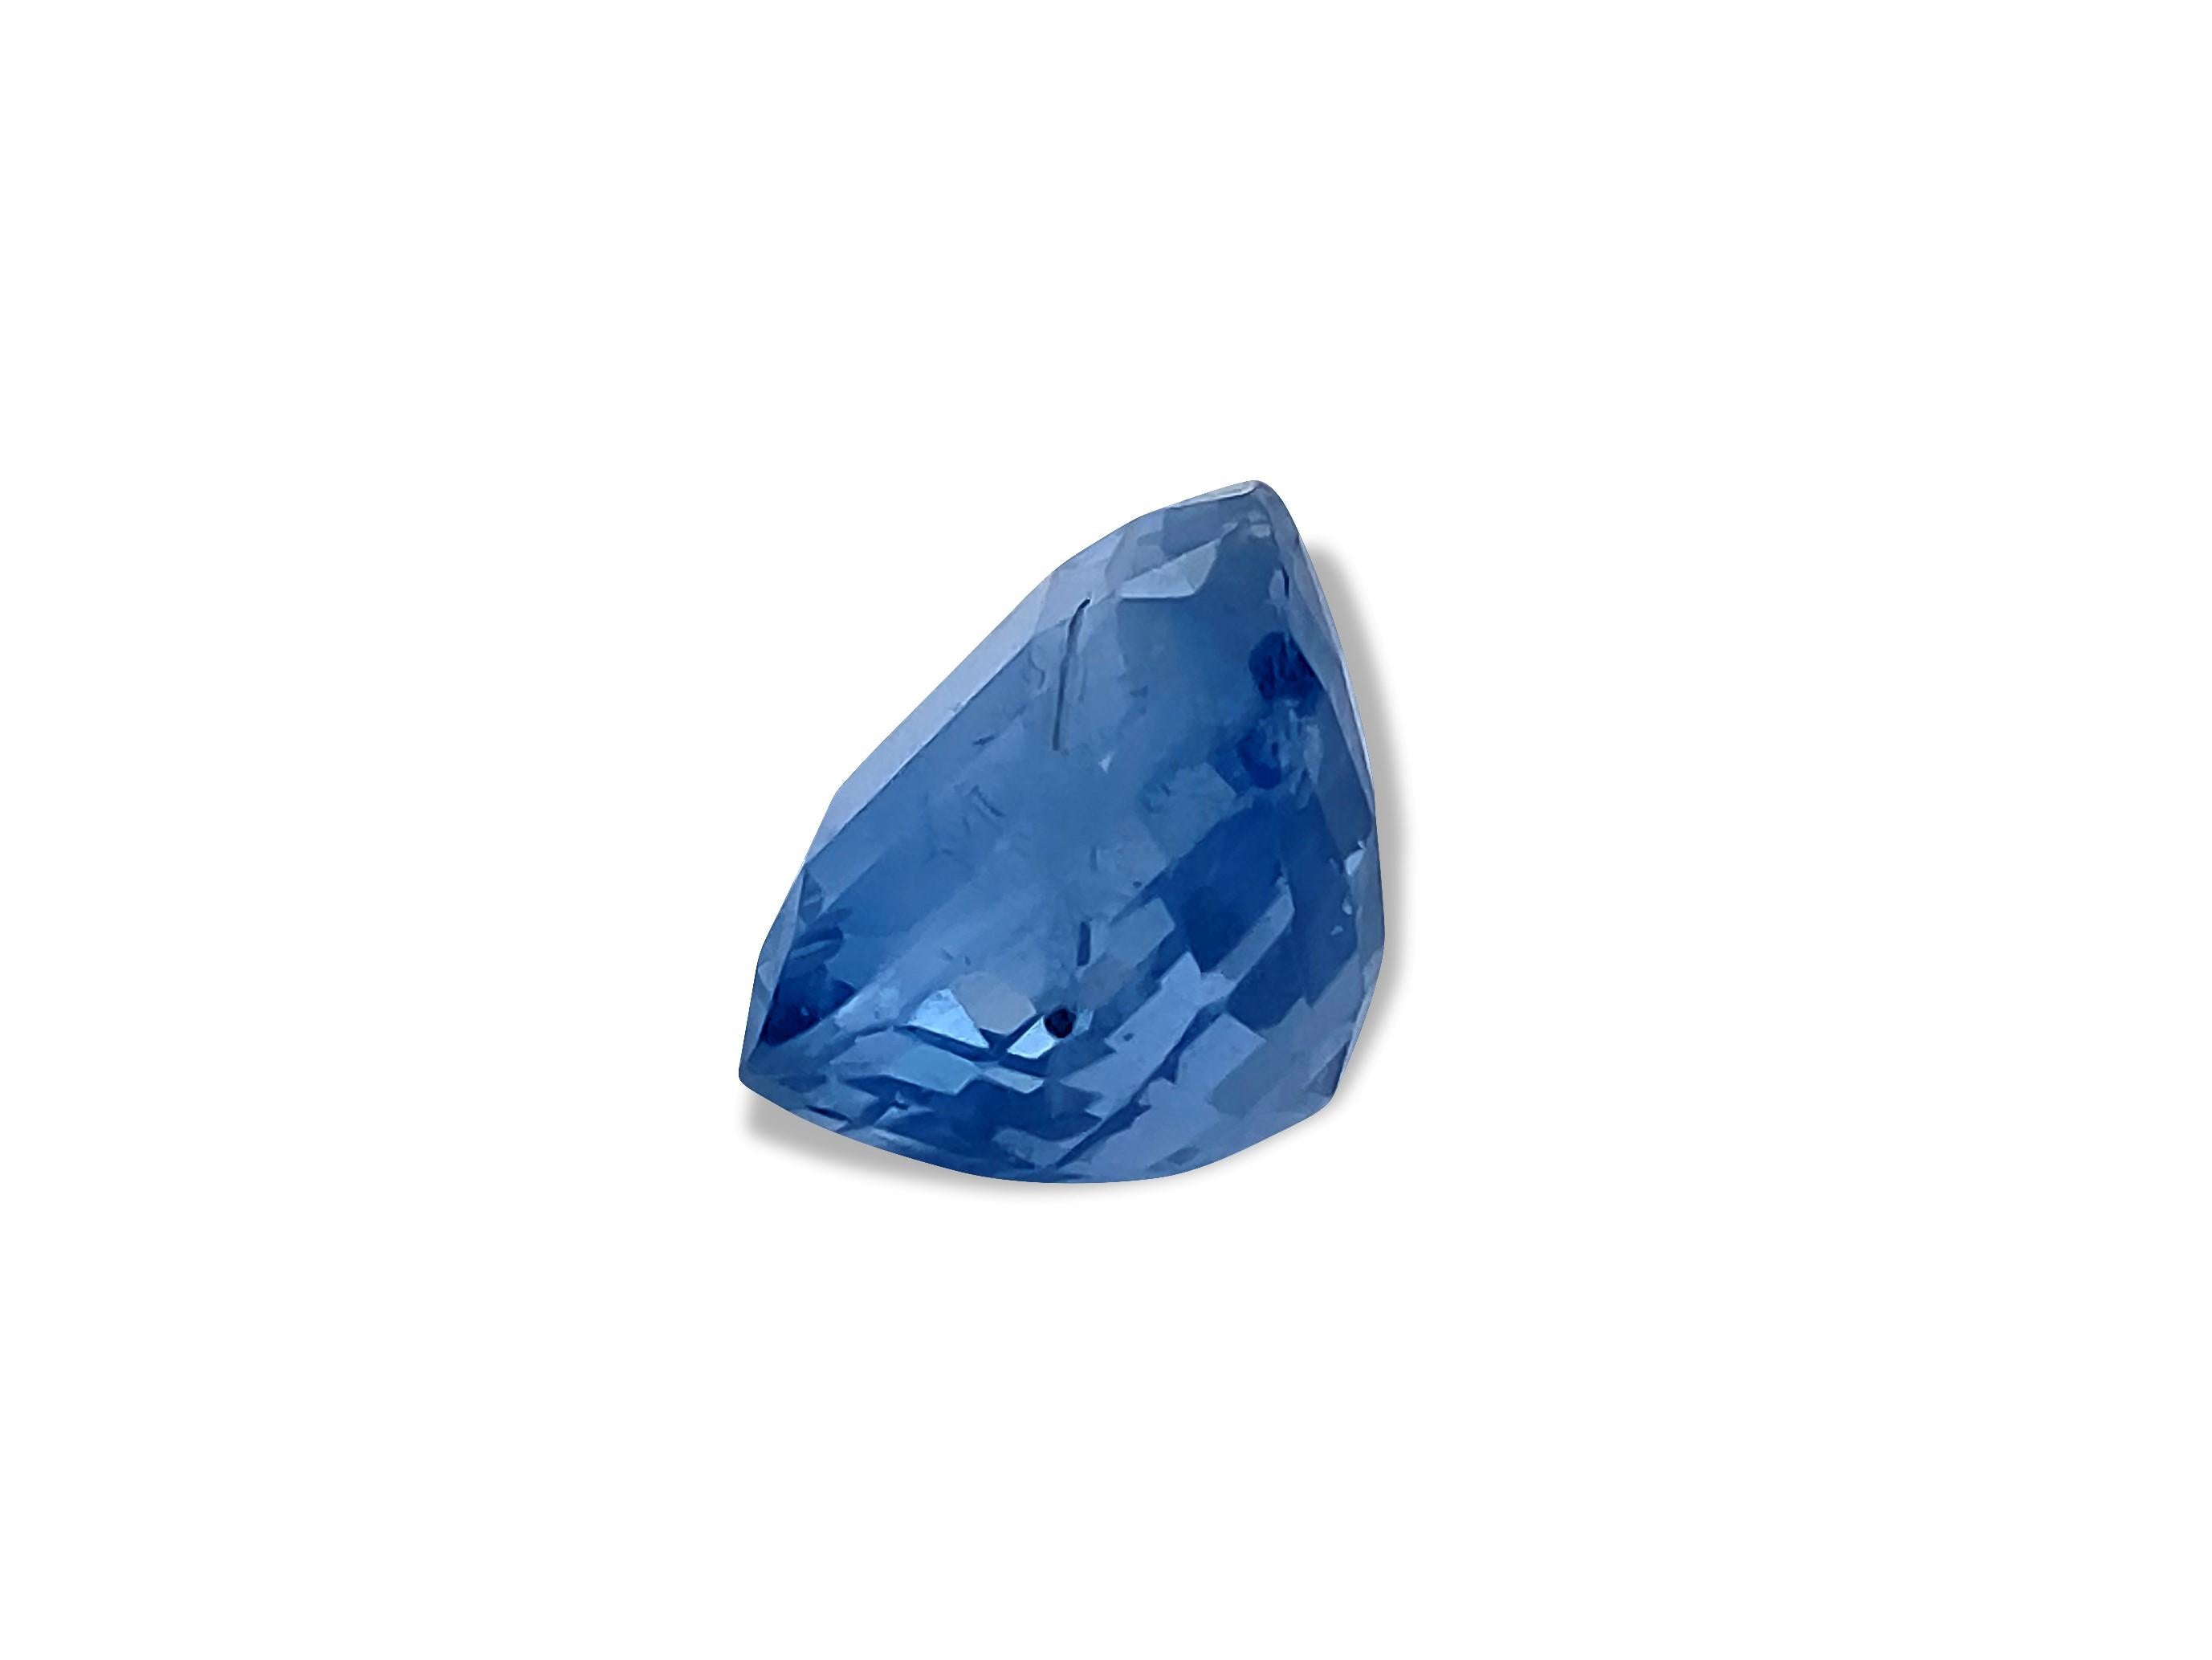 7.02 carat blue sapphire. 100% natural earth mined, no heat. 
Cushion cut sapphire. Gorgeous blue sapphire. Certified by GIA. Comes with hard copy. 